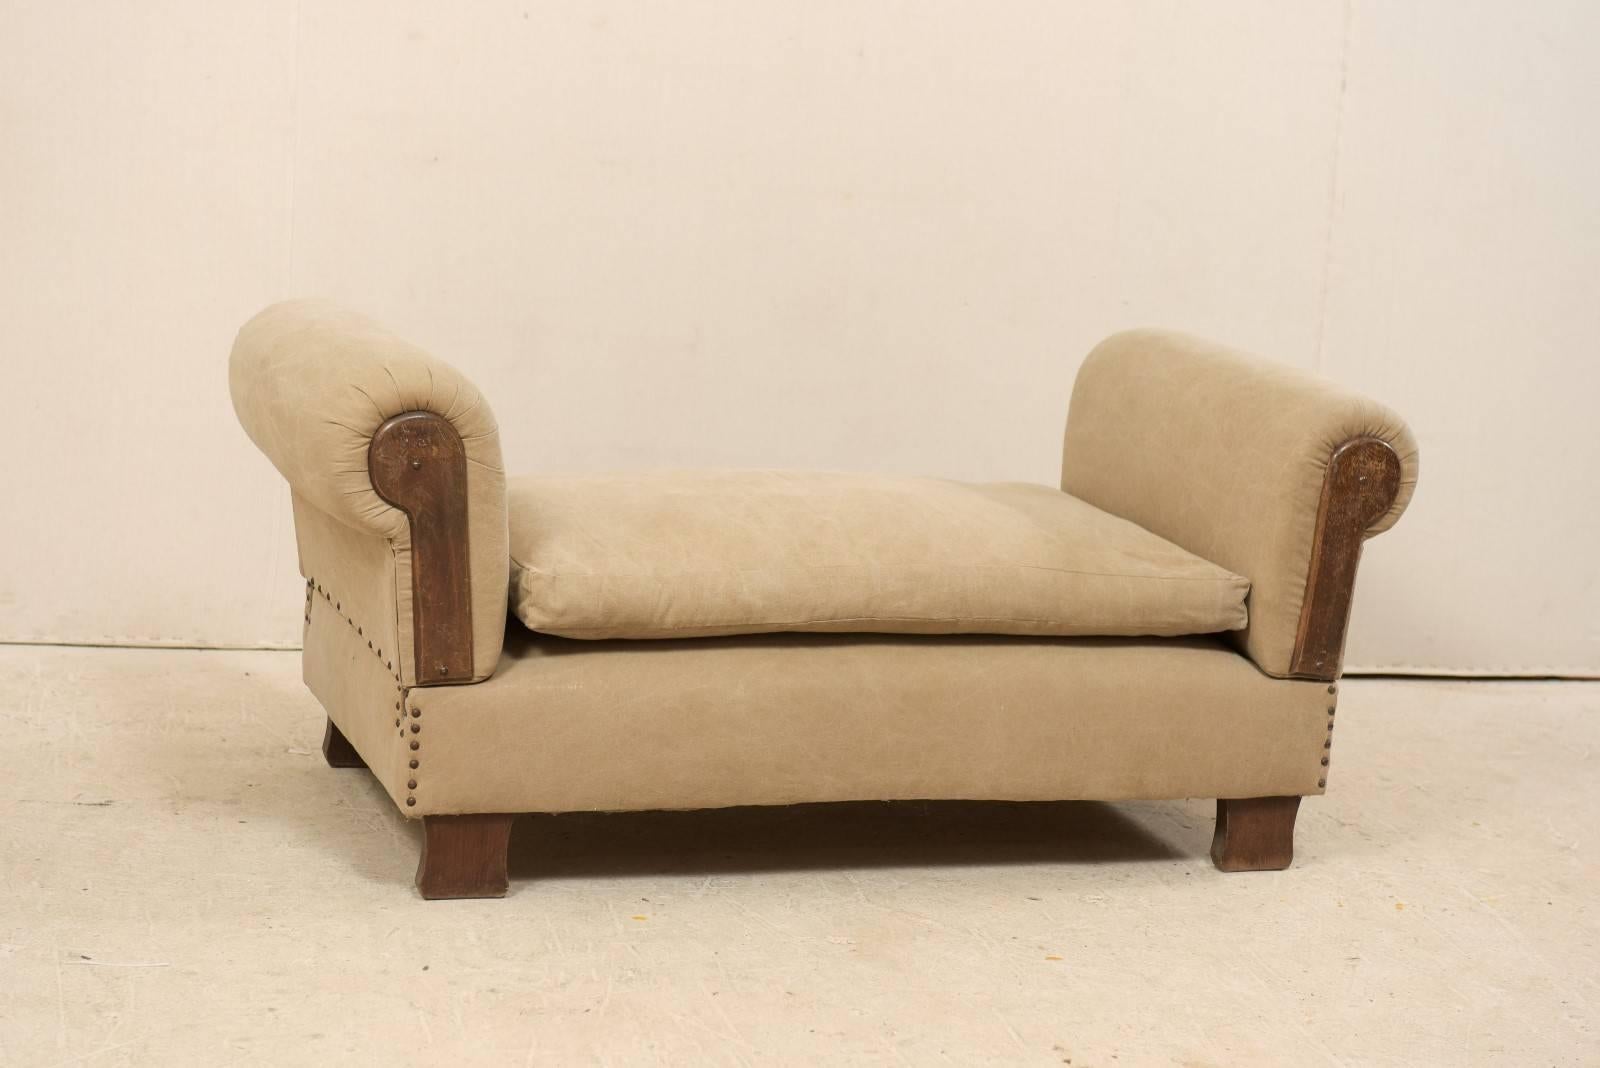 A French lit de jour (daybed) from the 1920s-1930s. This antique French settee features drop style arms on either far end, which when extended converts this bench into a chaise or daybed. The arms have rounded pleating with insert wood panels. This